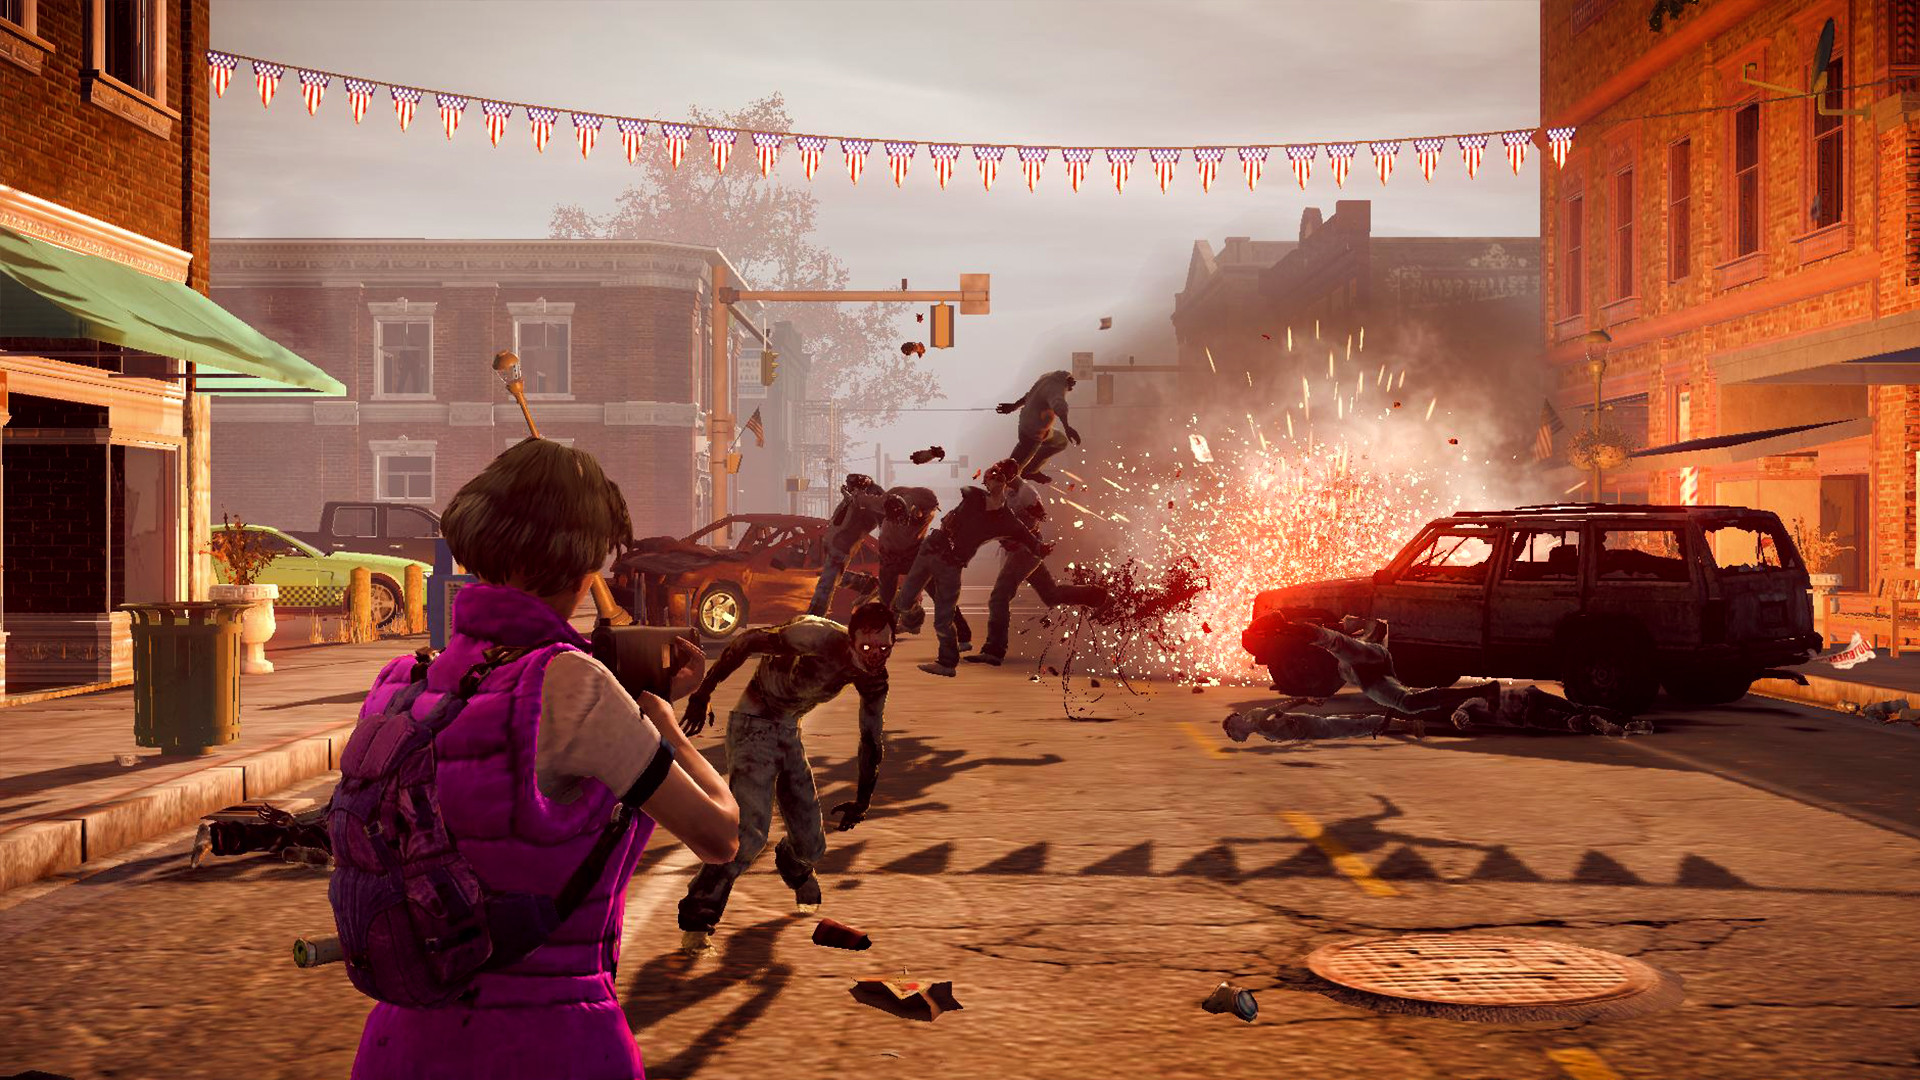 1920x1080 State of Decay on Xbox One Achievement List